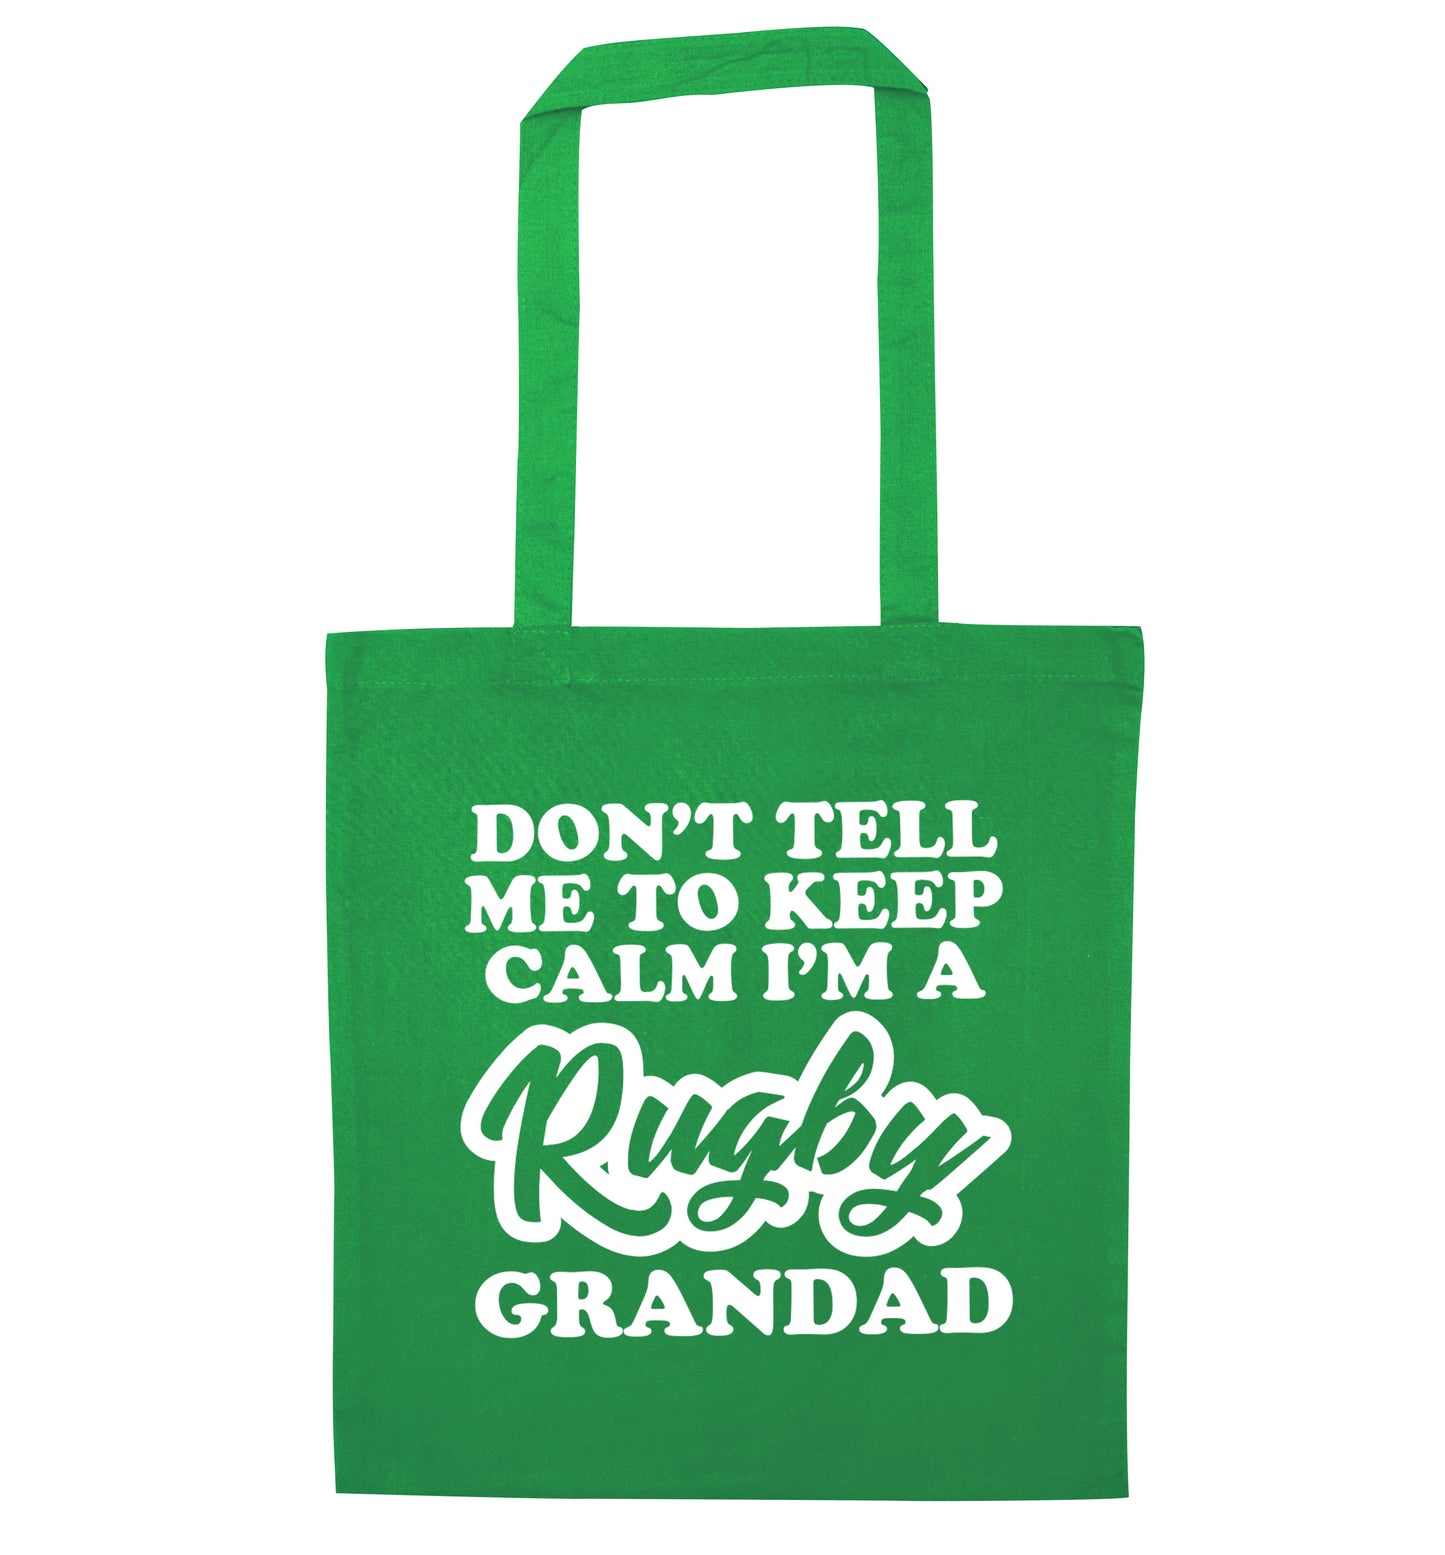 Don't tell me to keep calm I'm a rugby dad green tote bag